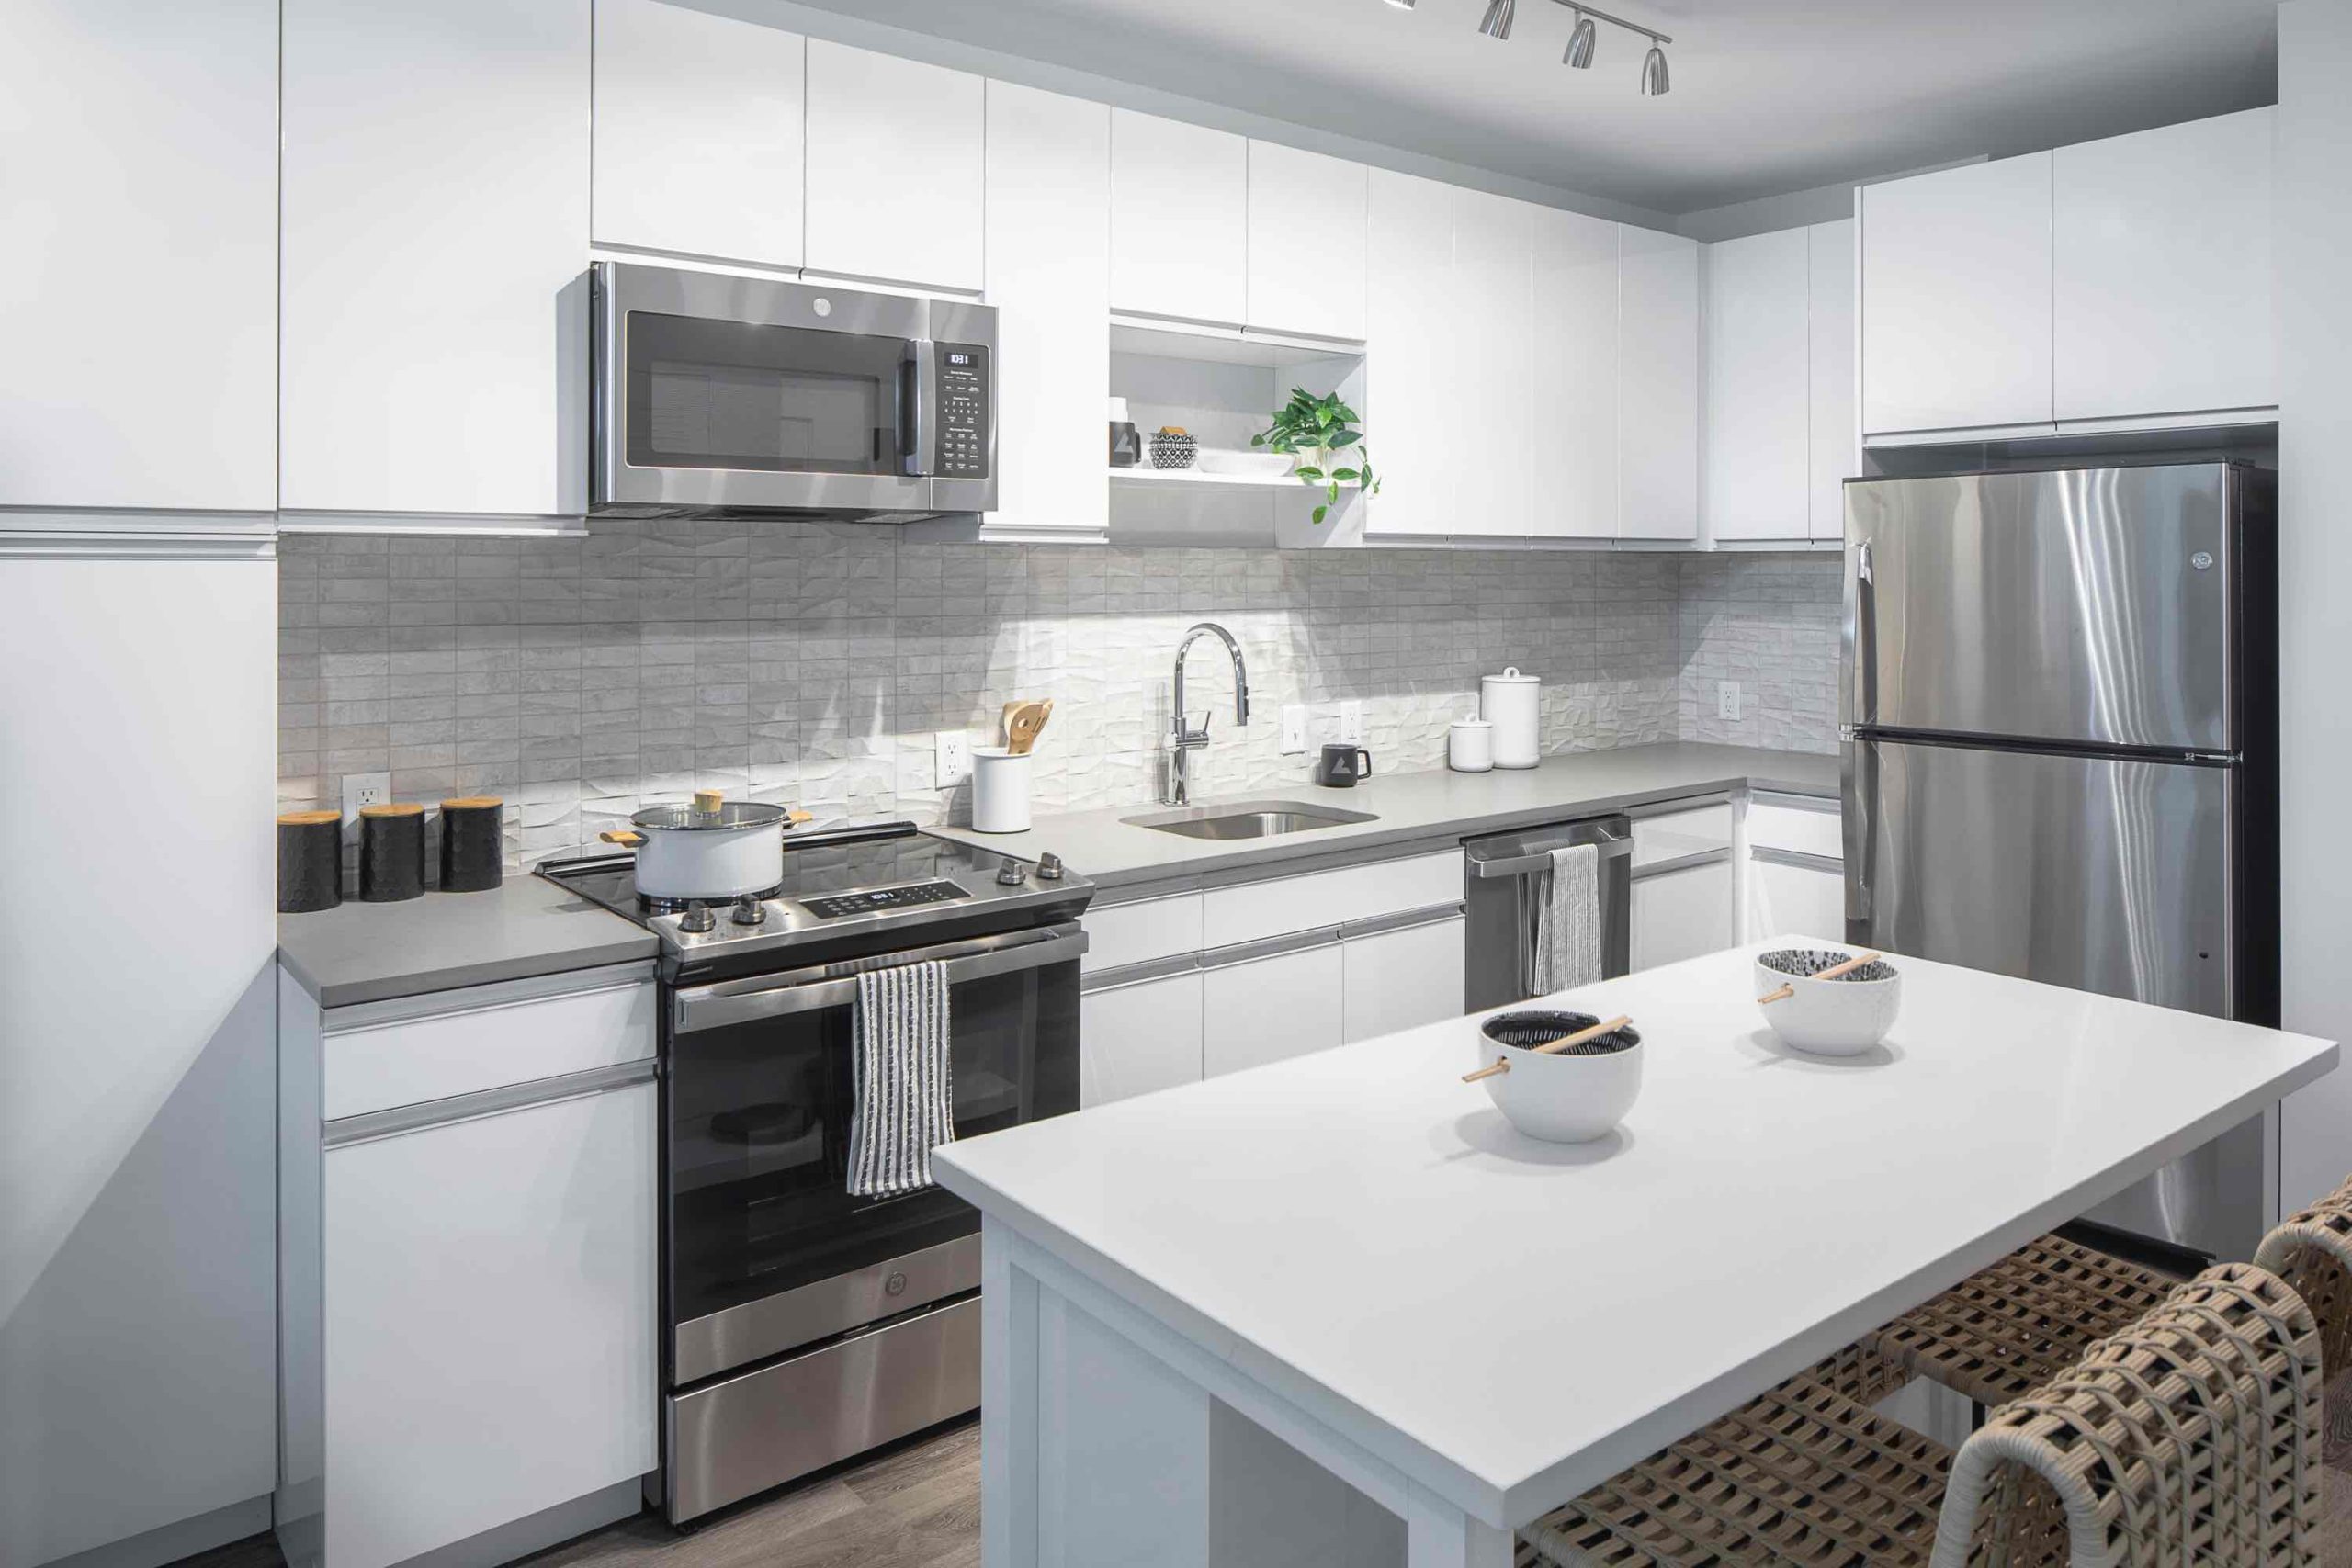 Contemporary kitchen with white counter top & stainless steel appliances. Inside our luxury apartments at 250 Mission.